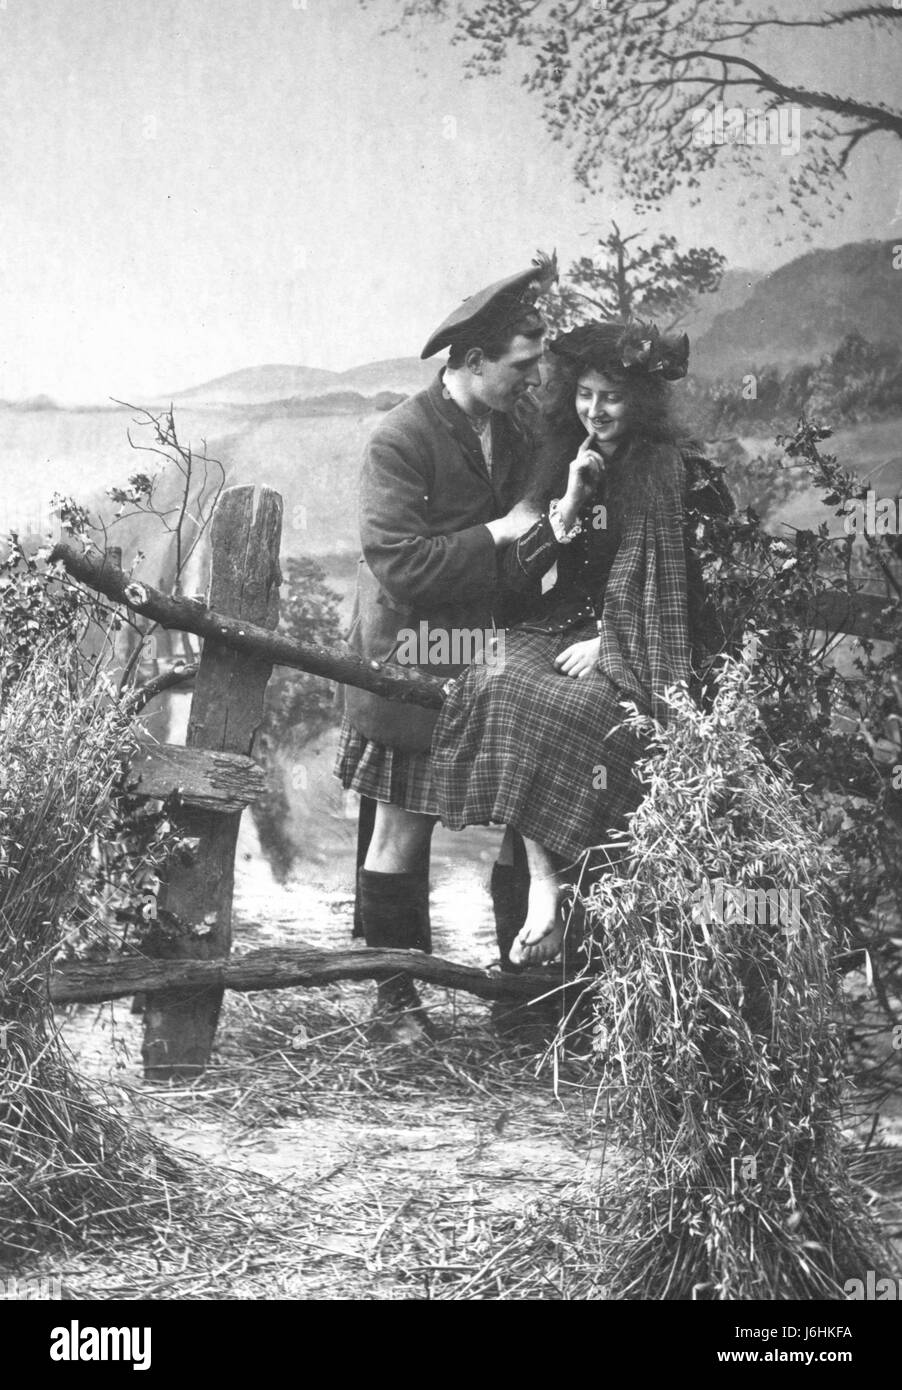 Scottish man in full tartan outfit, flirts with a tartan-dressed woman who sits on a wood fence in the countryside. He is gently embracing her, she is shyly smiling. 1911.   To see all my Alamy  vintage images - in Search, key these 2 words:  Prestor  vintage Stock Photo